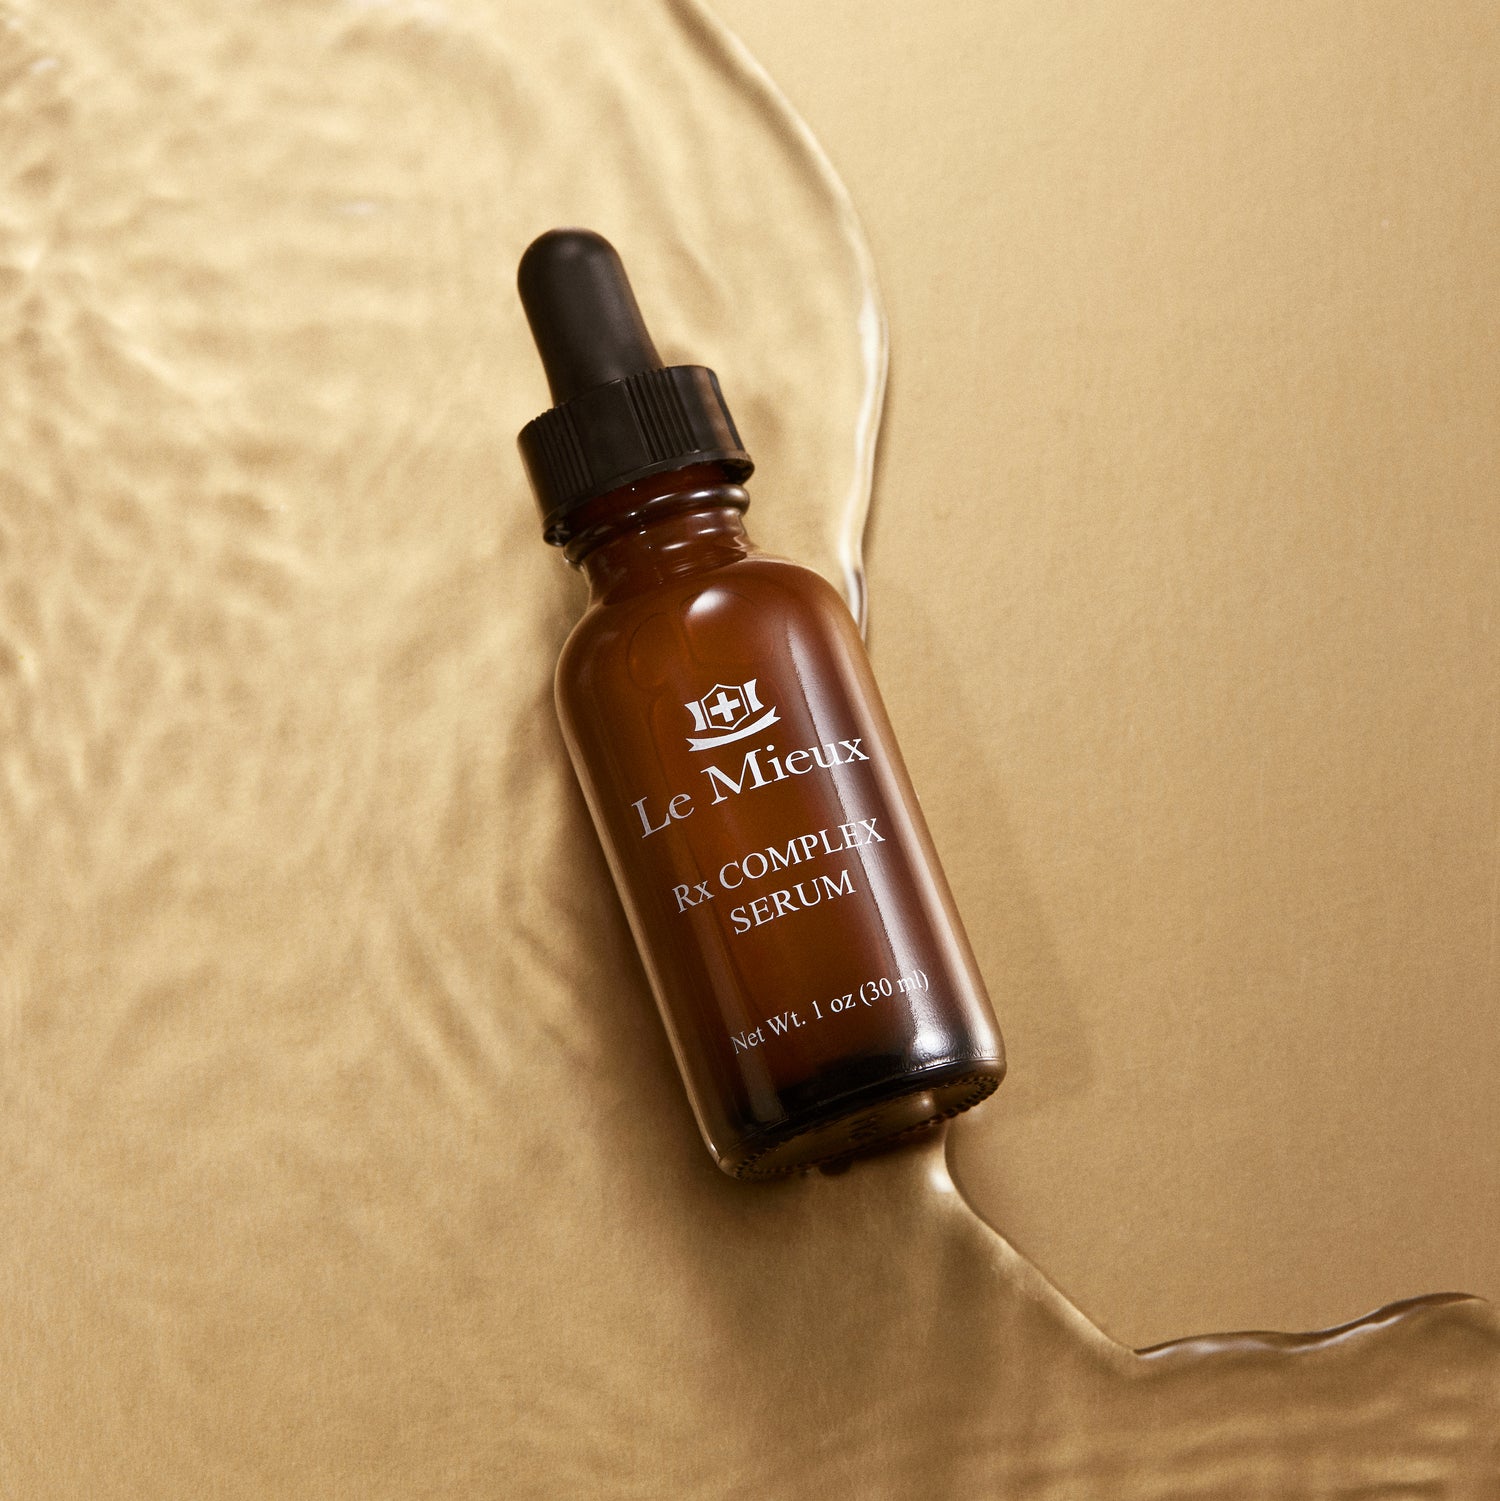  RX COMPLEX SERUM from Le Mieux Skincare - 2